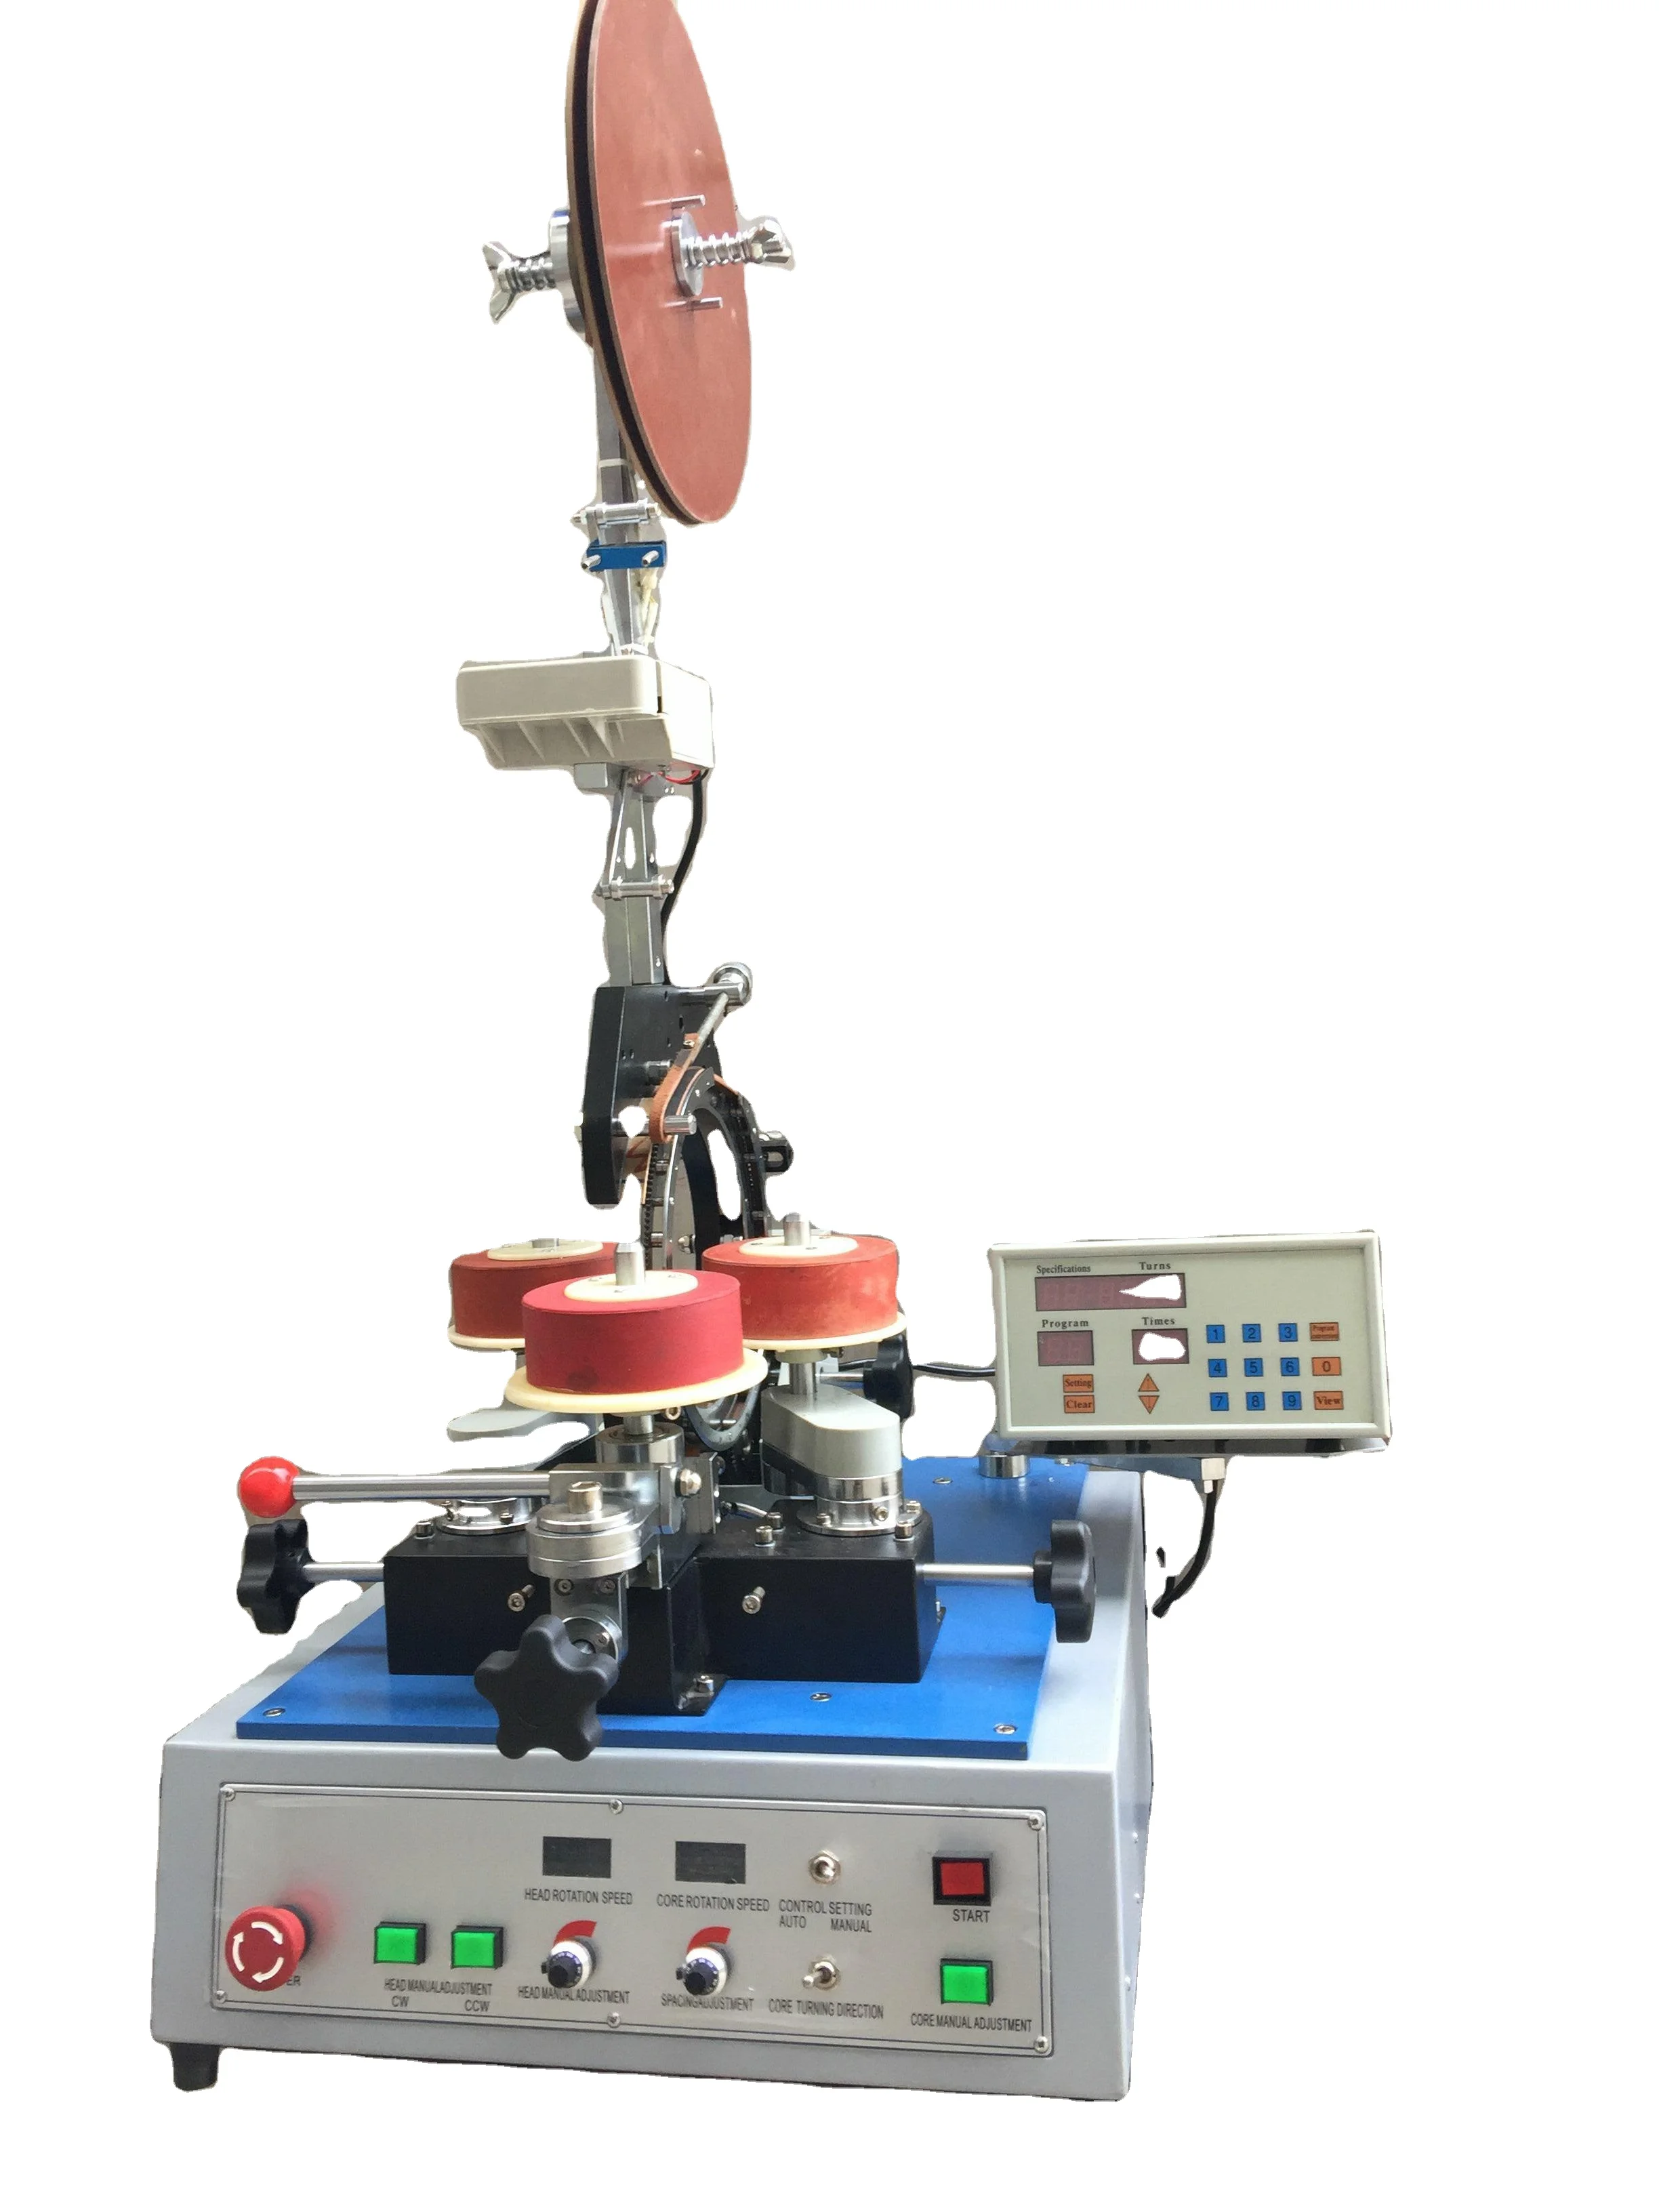 
GMTM-850taping machine,place insulating tapes on cores and windings in closely controlled fashion 